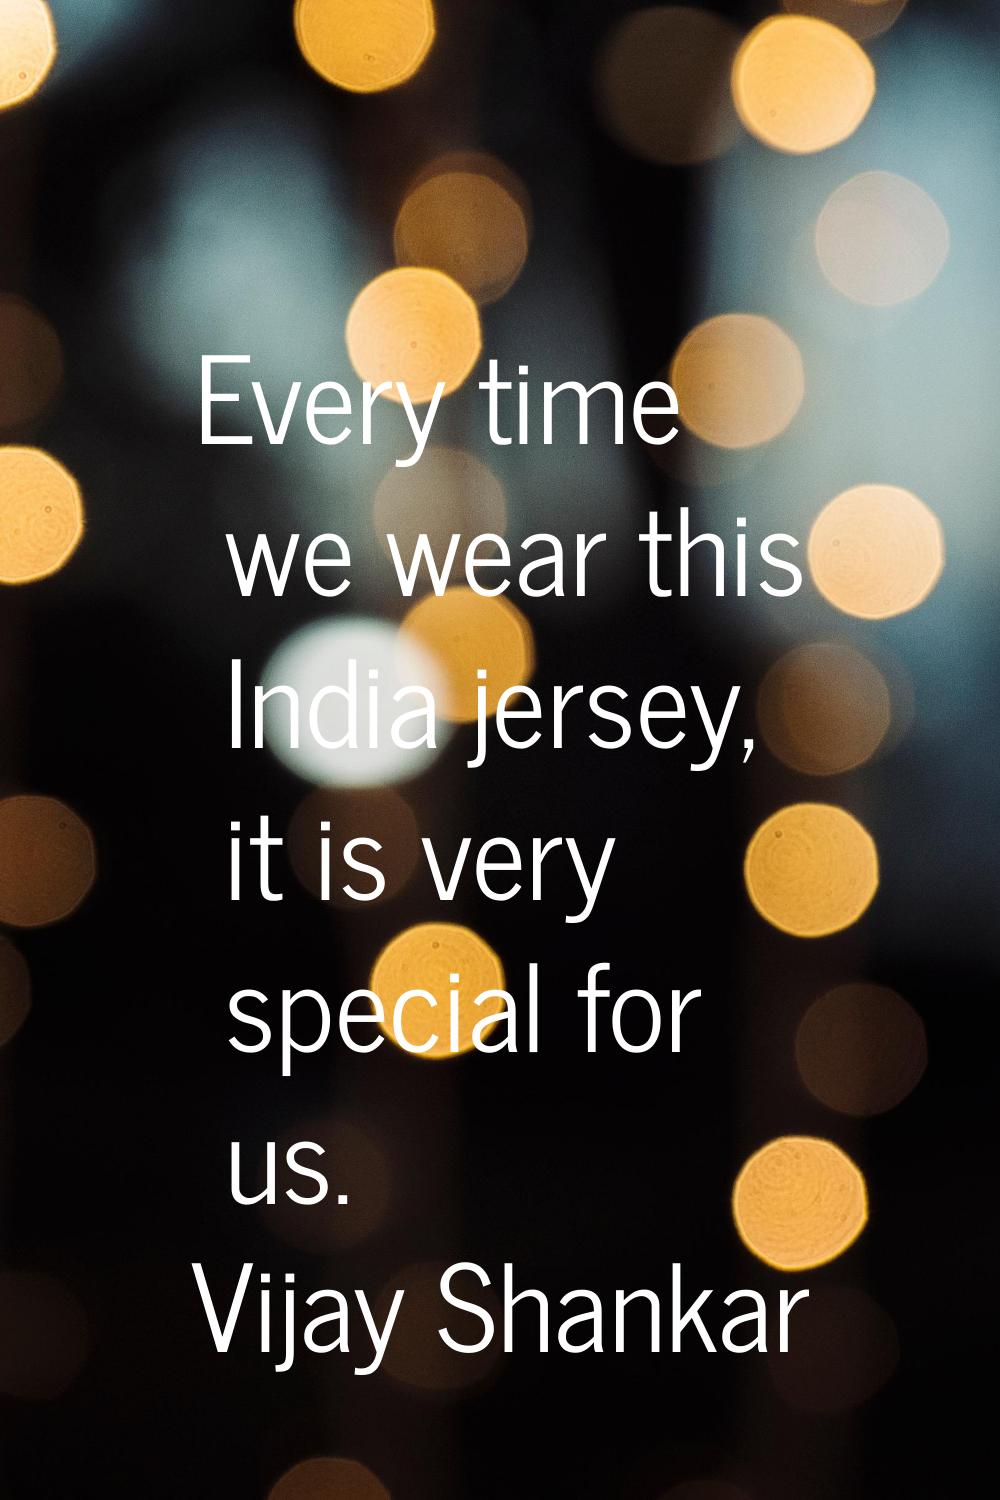 Every time we wear this India jersey, it is very special for us.